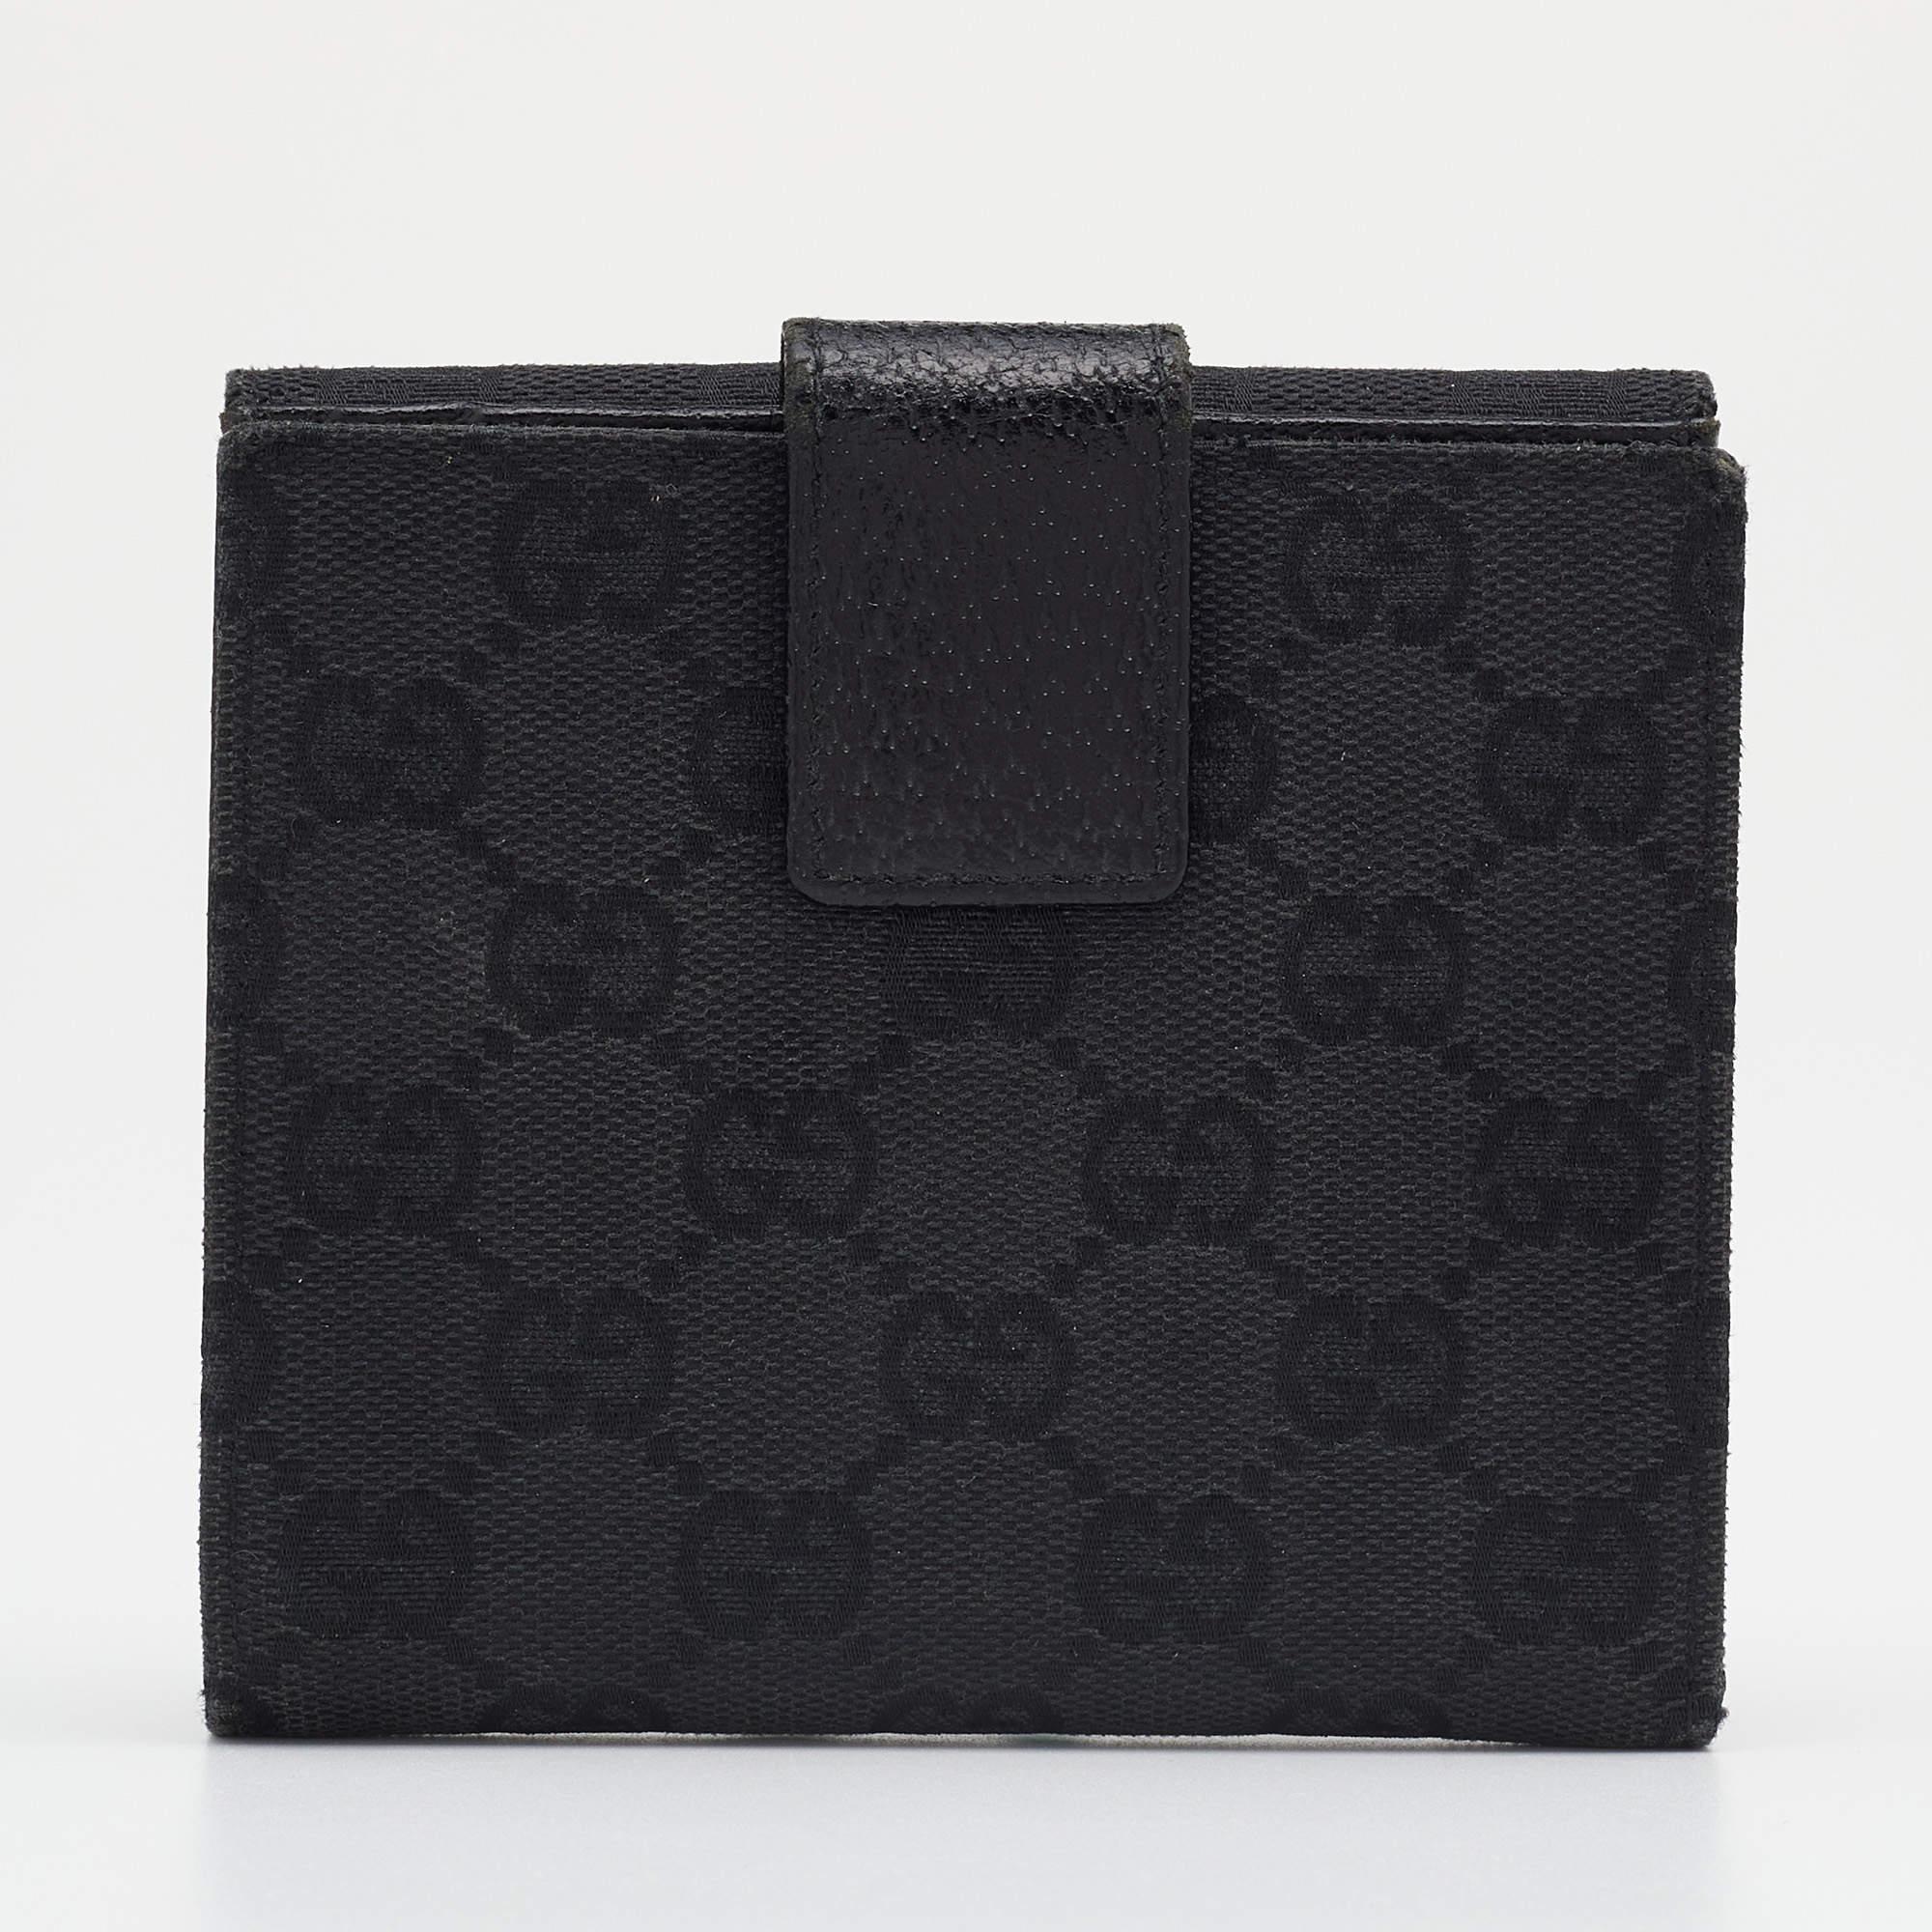 This wallet by Gucci has been crafted from GG canvas and leather and detailed with gold-tone studs on the front flap closure. It opens to reveal multiple slots and slip pockets to neatly arrange your cards and cash.
 
Includes: Original Box

